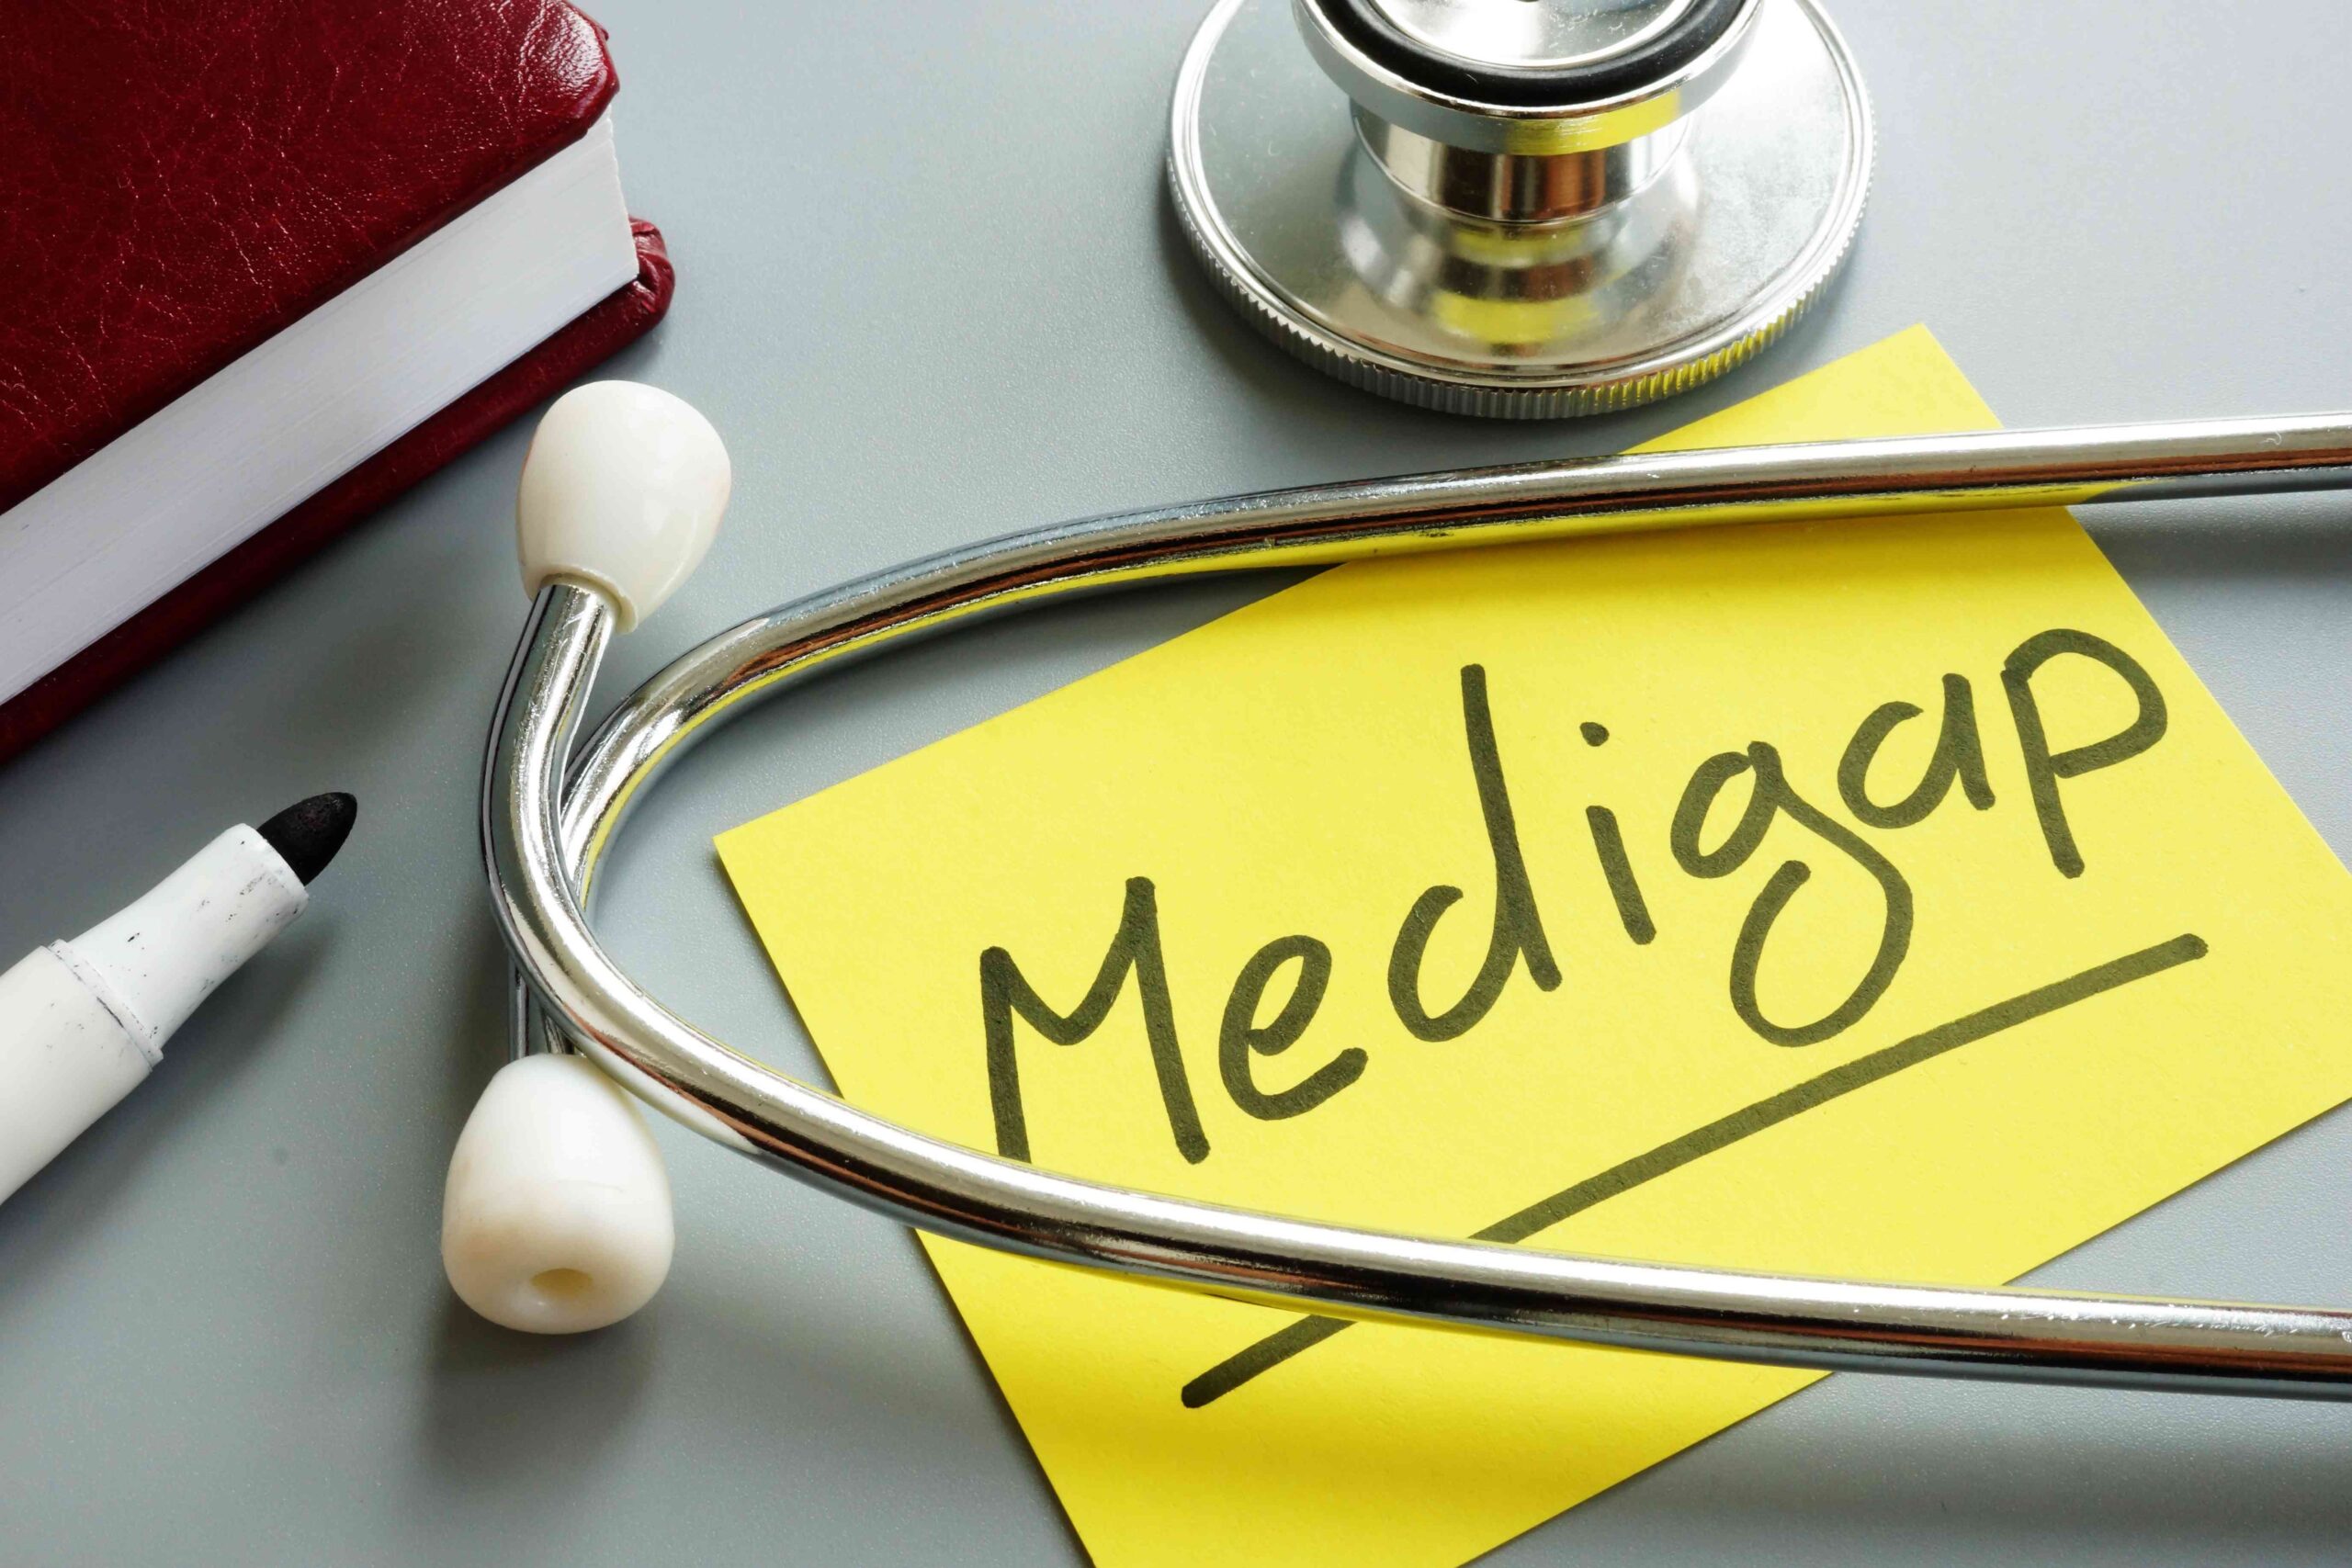 Medigap: What You Need to Know About Medicare Supplement Insurance